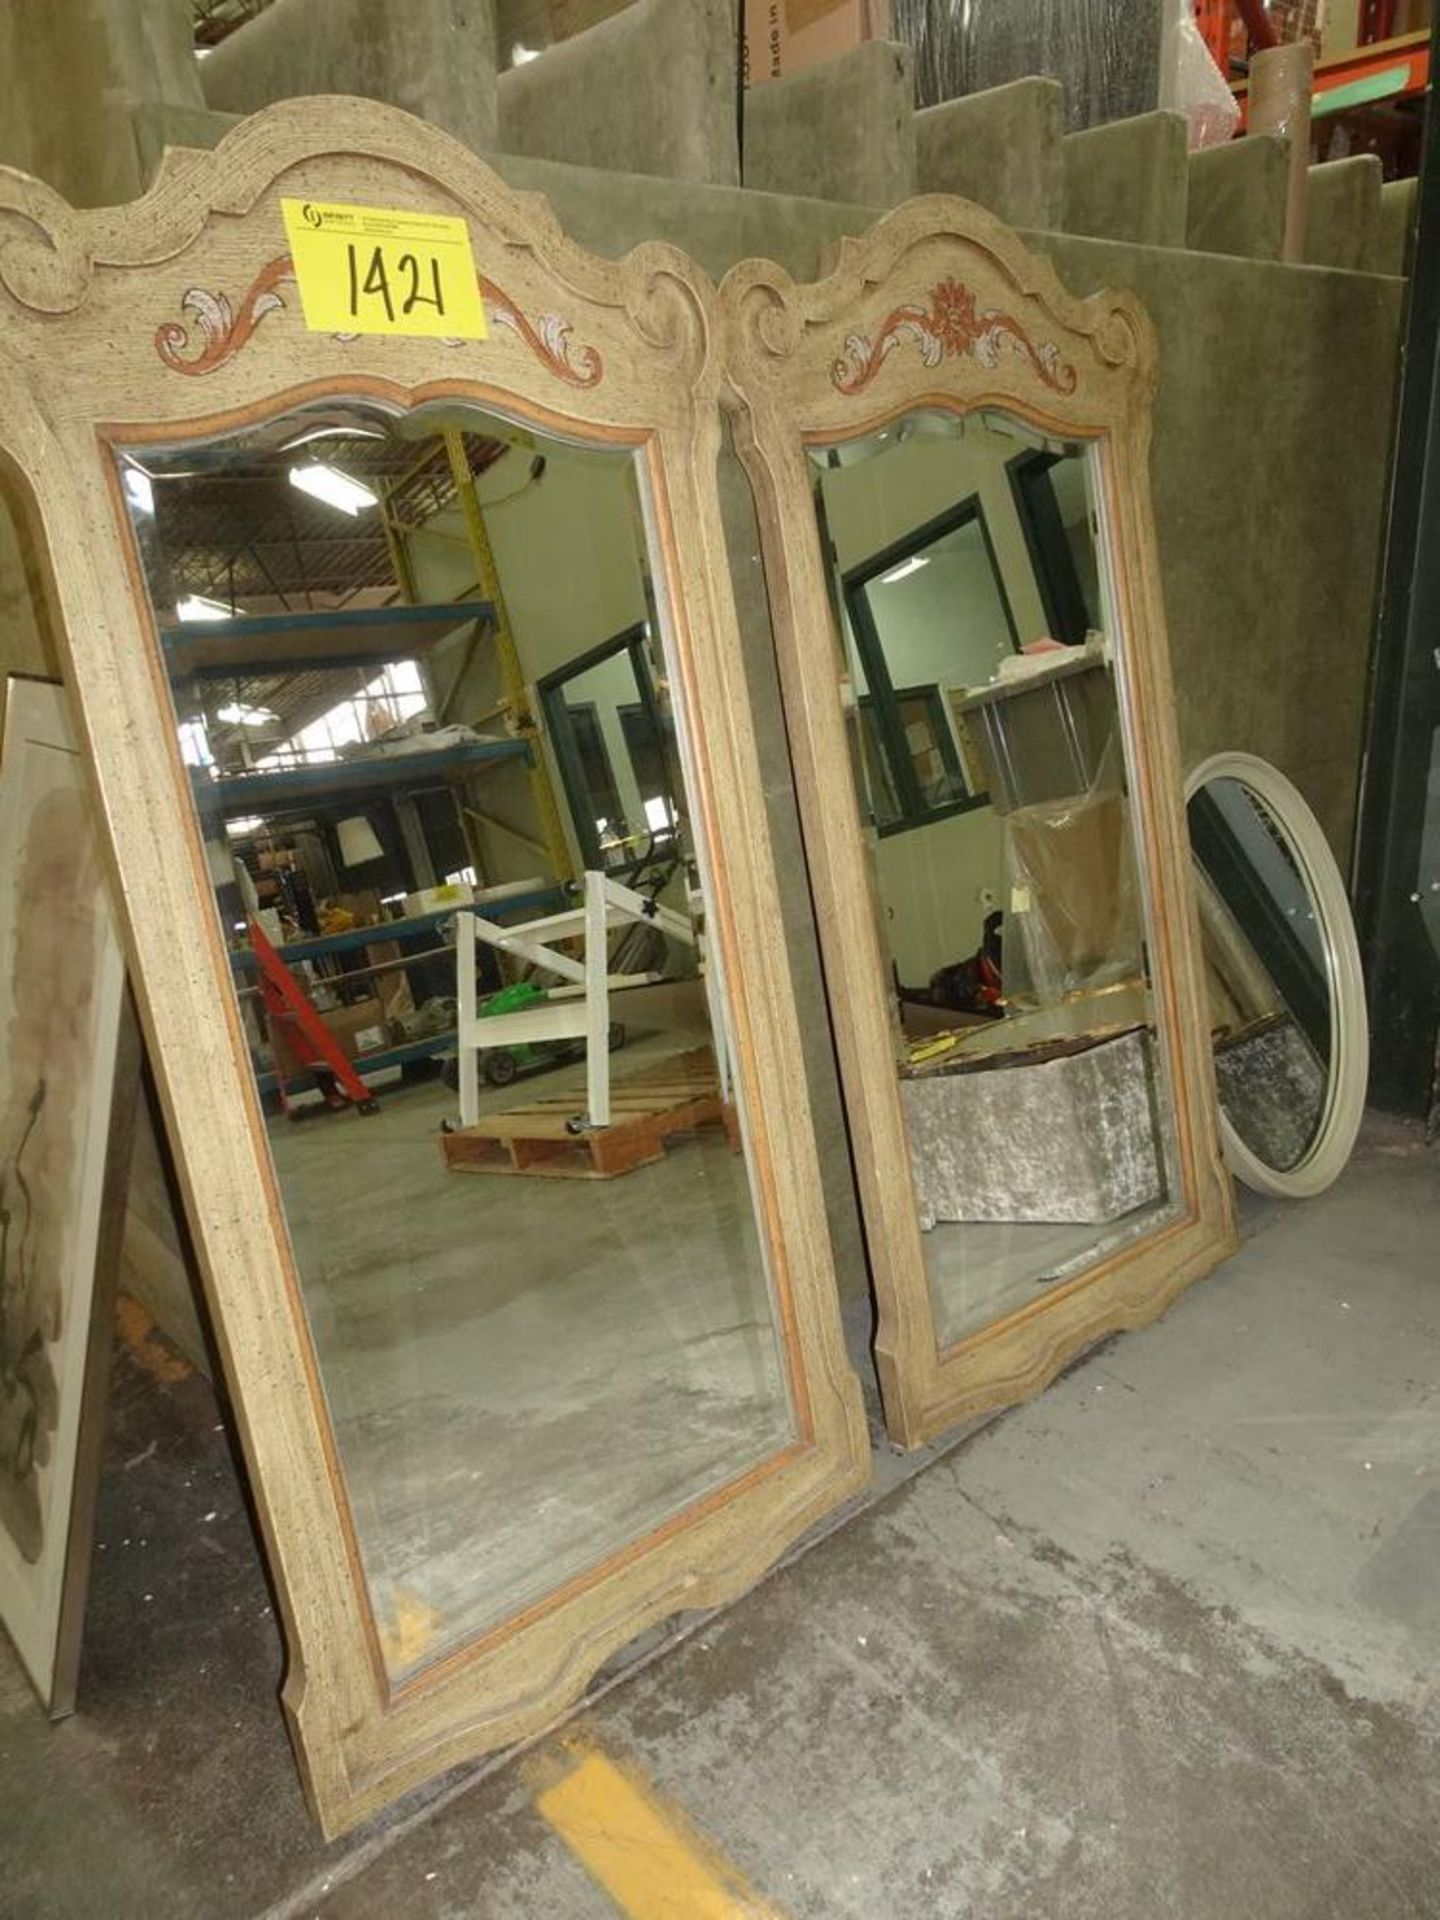 PAIR OF MIRRORS - WOOD FRAME, BEVELLED GLASS